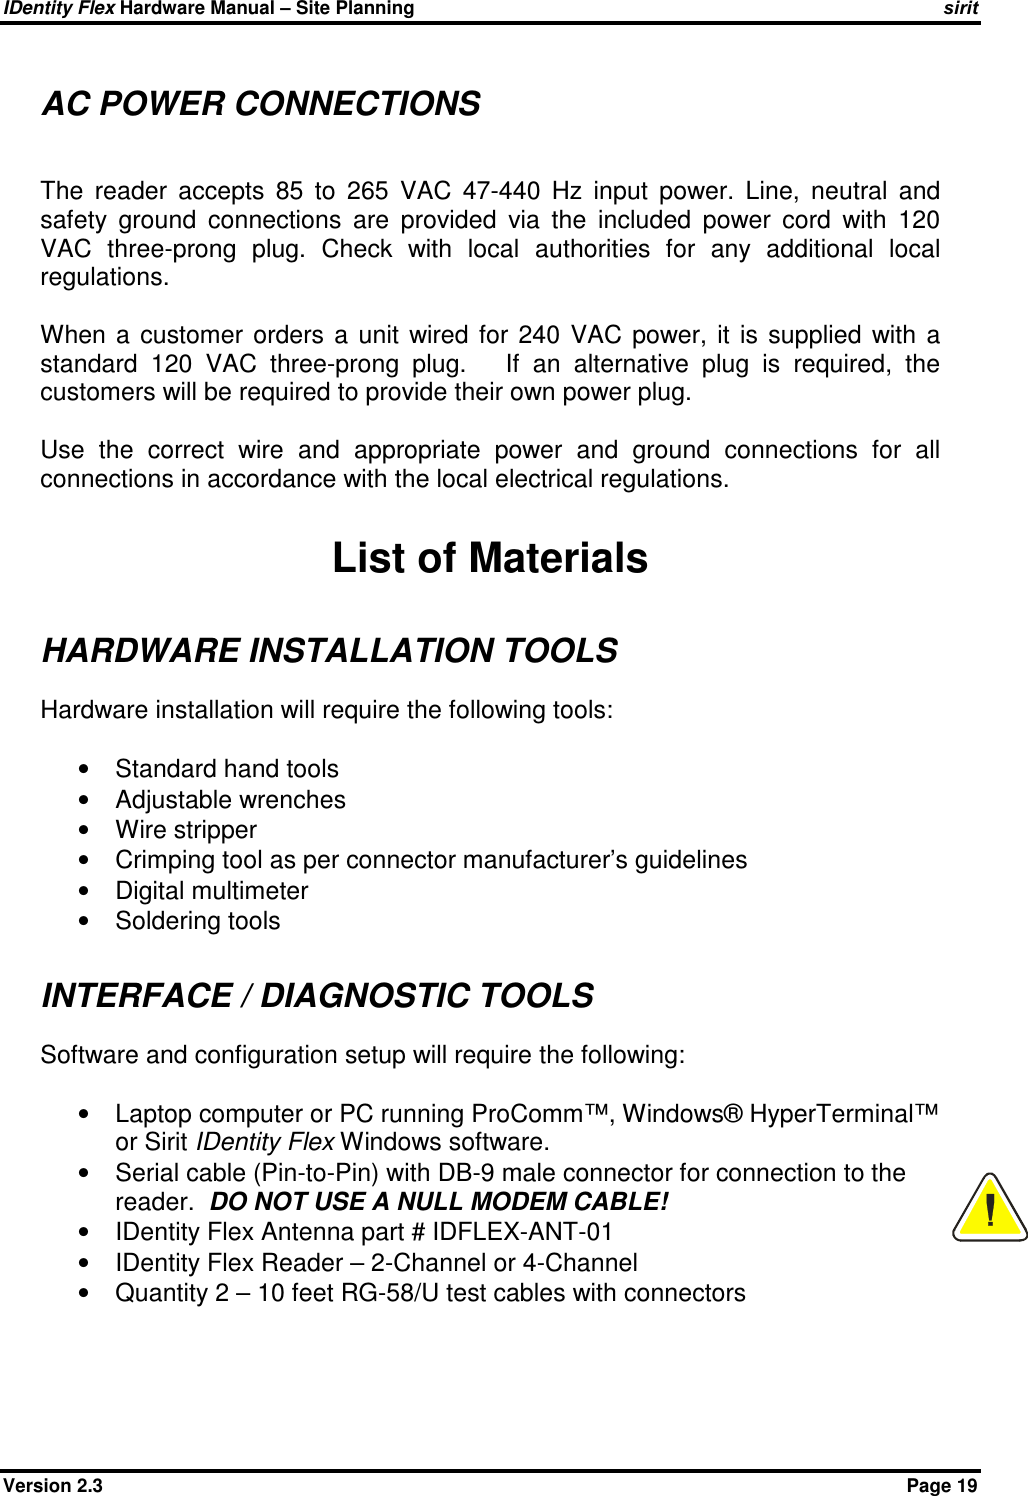 IDentity Flex Hardware Manual – Site Planning    sirit Version 2.3    Page 19 AC POWER CONNECTIONS  The  reader  accepts  85  to  265  VAC  47-440  Hz  input  power.  Line,  neutral  and safety  ground  connections  are  provided  via  the  included  power  cord  with  120 VAC  three-prong  plug.  Check  with  local  authorities  for  any  additional  local regulations.   When  a  customer  orders  a  unit  wired  for  240  VAC  power,  it  is  supplied  with  a standard  120  VAC  three-prong  plug.      If  an  alternative  plug  is  required,  the customers will be required to provide their own power plug.  Use  the  correct  wire  and  appropriate  power  and  ground  connections  for  all connections in accordance with the local electrical regulations.  List of Materials HARDWARE INSTALLATION TOOLS Hardware installation will require the following tools:  •  Standard hand tools •  Adjustable wrenches •  Wire stripper •  Crimping tool as per connector manufacturer’s guidelines •  Digital multimeter •  Soldering tools  INTERFACE / DIAGNOSTIC TOOLS Software and configuration setup will require the following:  •  Laptop computer or PC running ProComm™, Windows® HyperTerminal™ or Sirit IDentity Flex Windows software. •  Serial cable (Pin-to-Pin) with DB-9 male connector for connection to the reader.  DO NOT USE A NULL MODEM CABLE! •  IDentity Flex Antenna part # IDFLEX-ANT-01 •  IDentity Flex Reader – 2-Channel or 4-Channel •  Quantity 2 – 10 feet RG-58/U test cables with connectors   